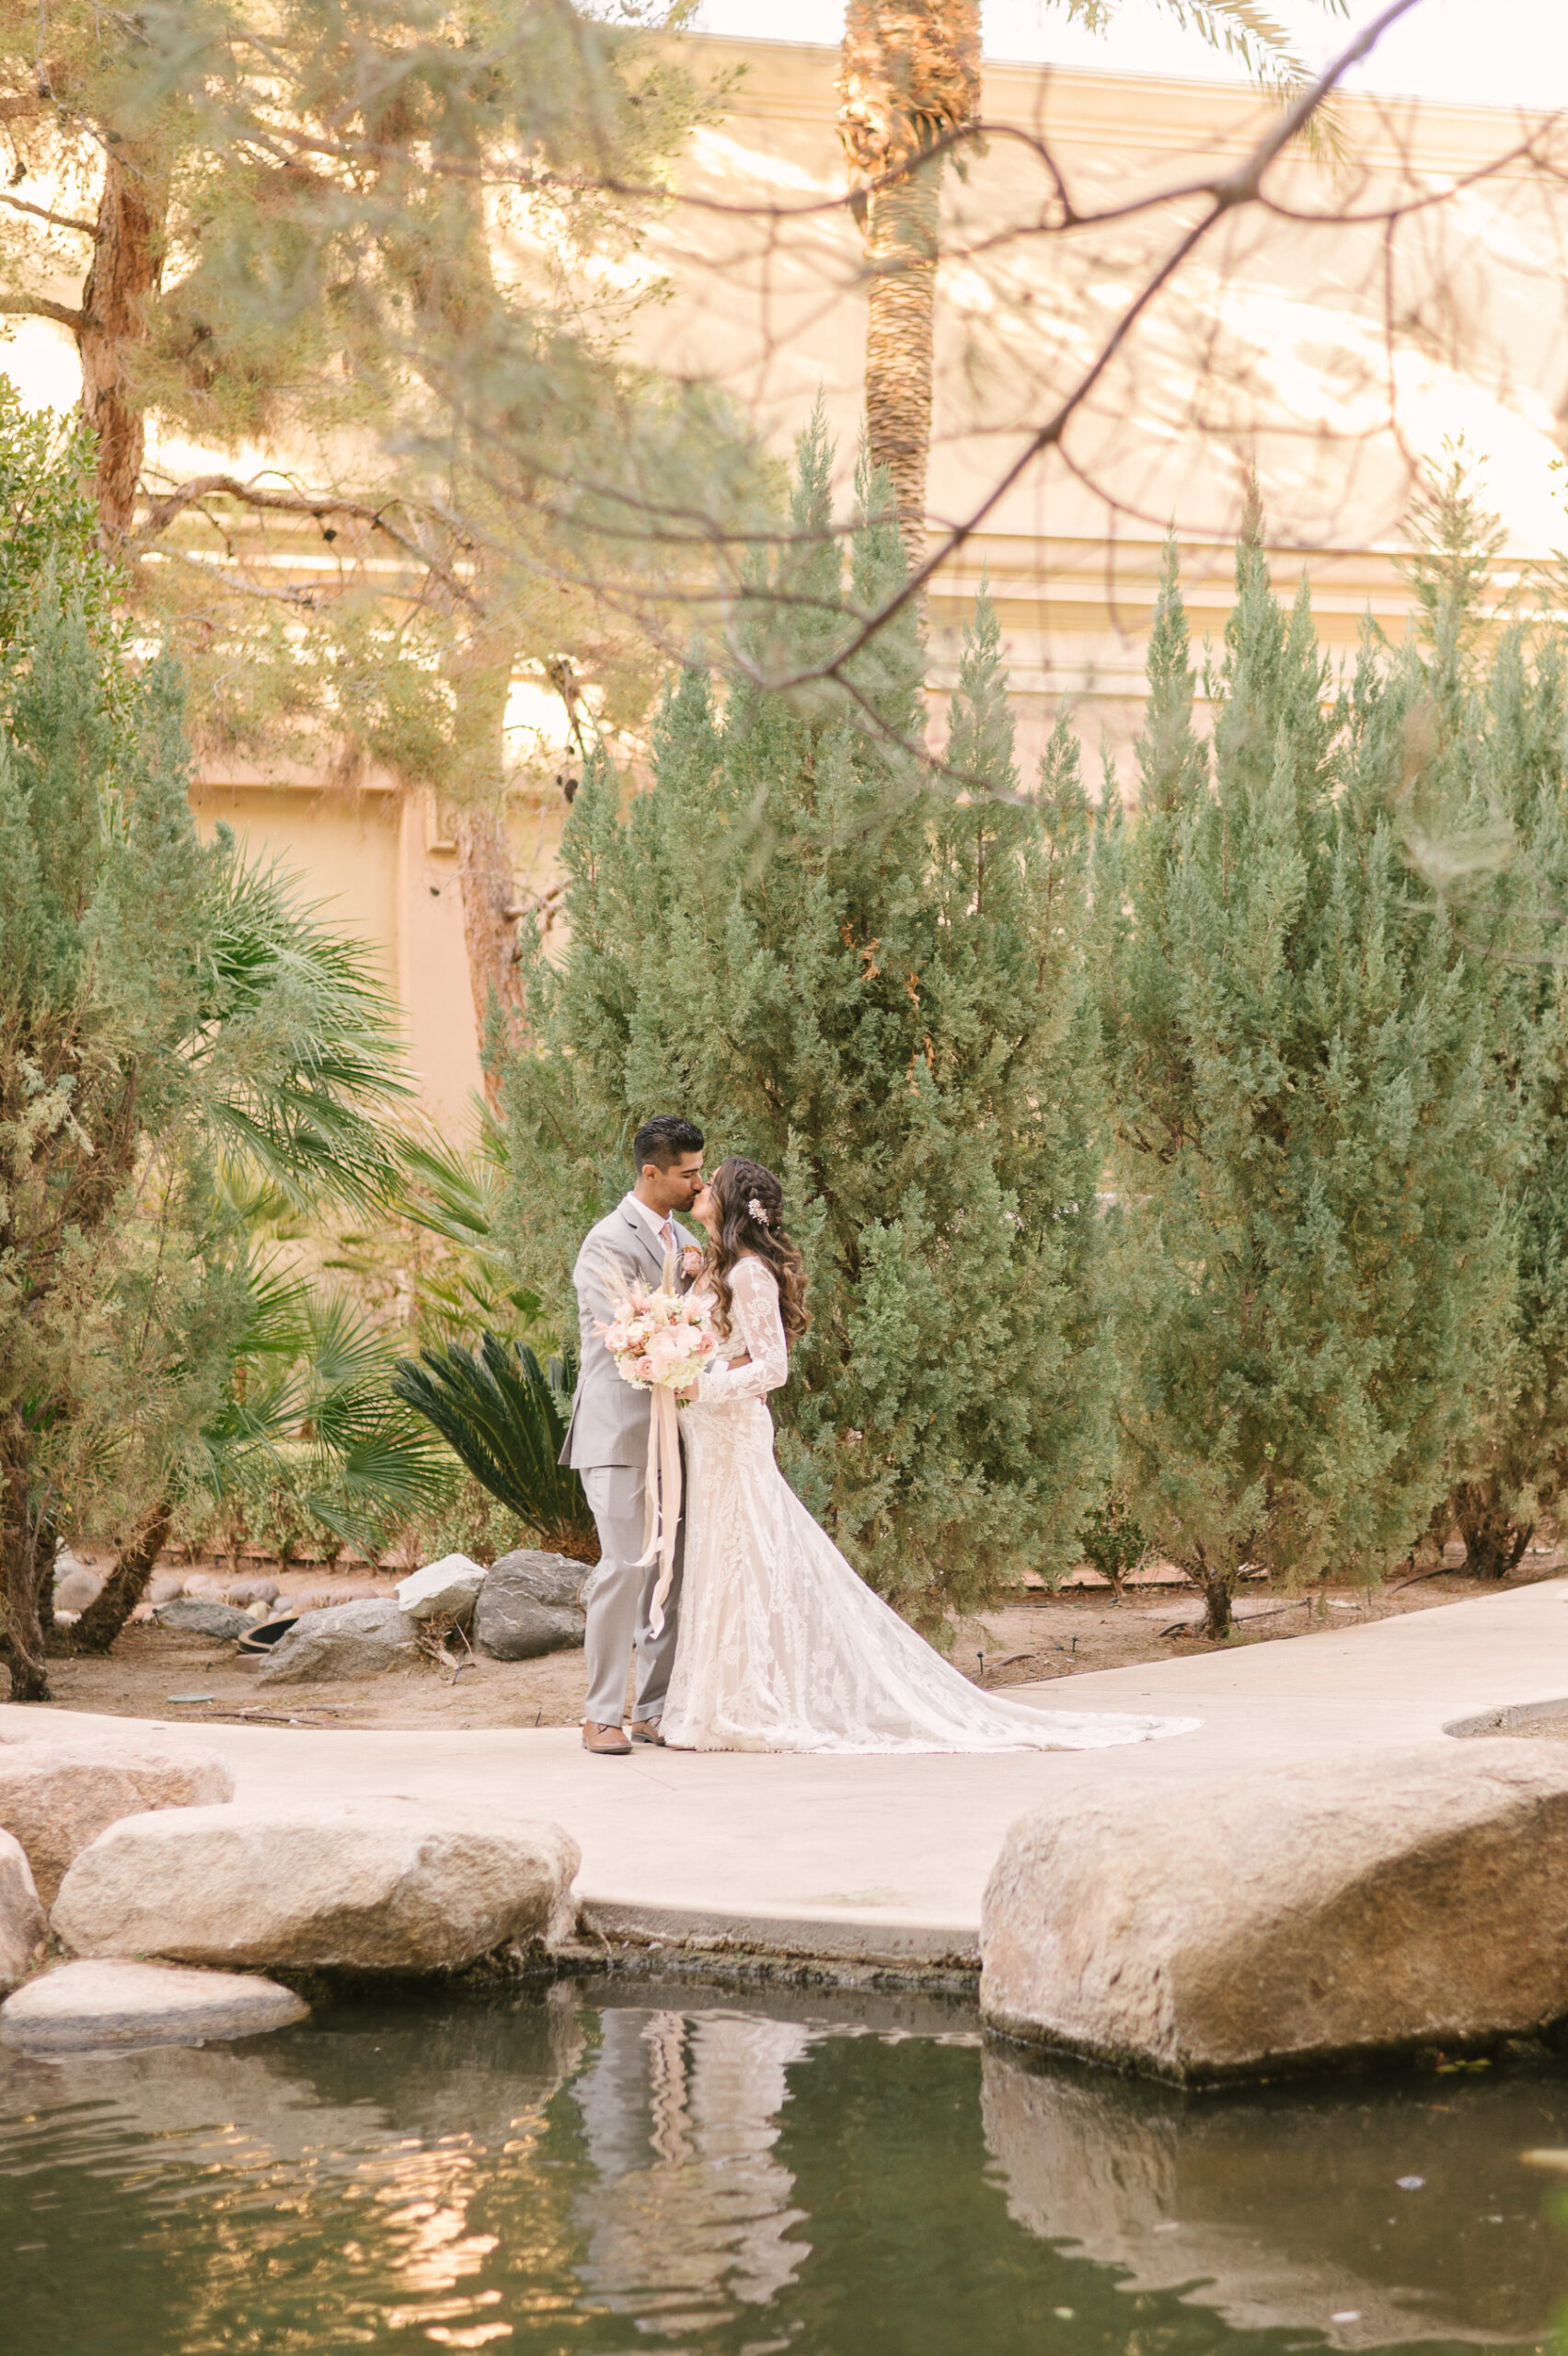 Bride and groom sharing a kiss during their wedding shoot arranged by Elopement Las Vegas